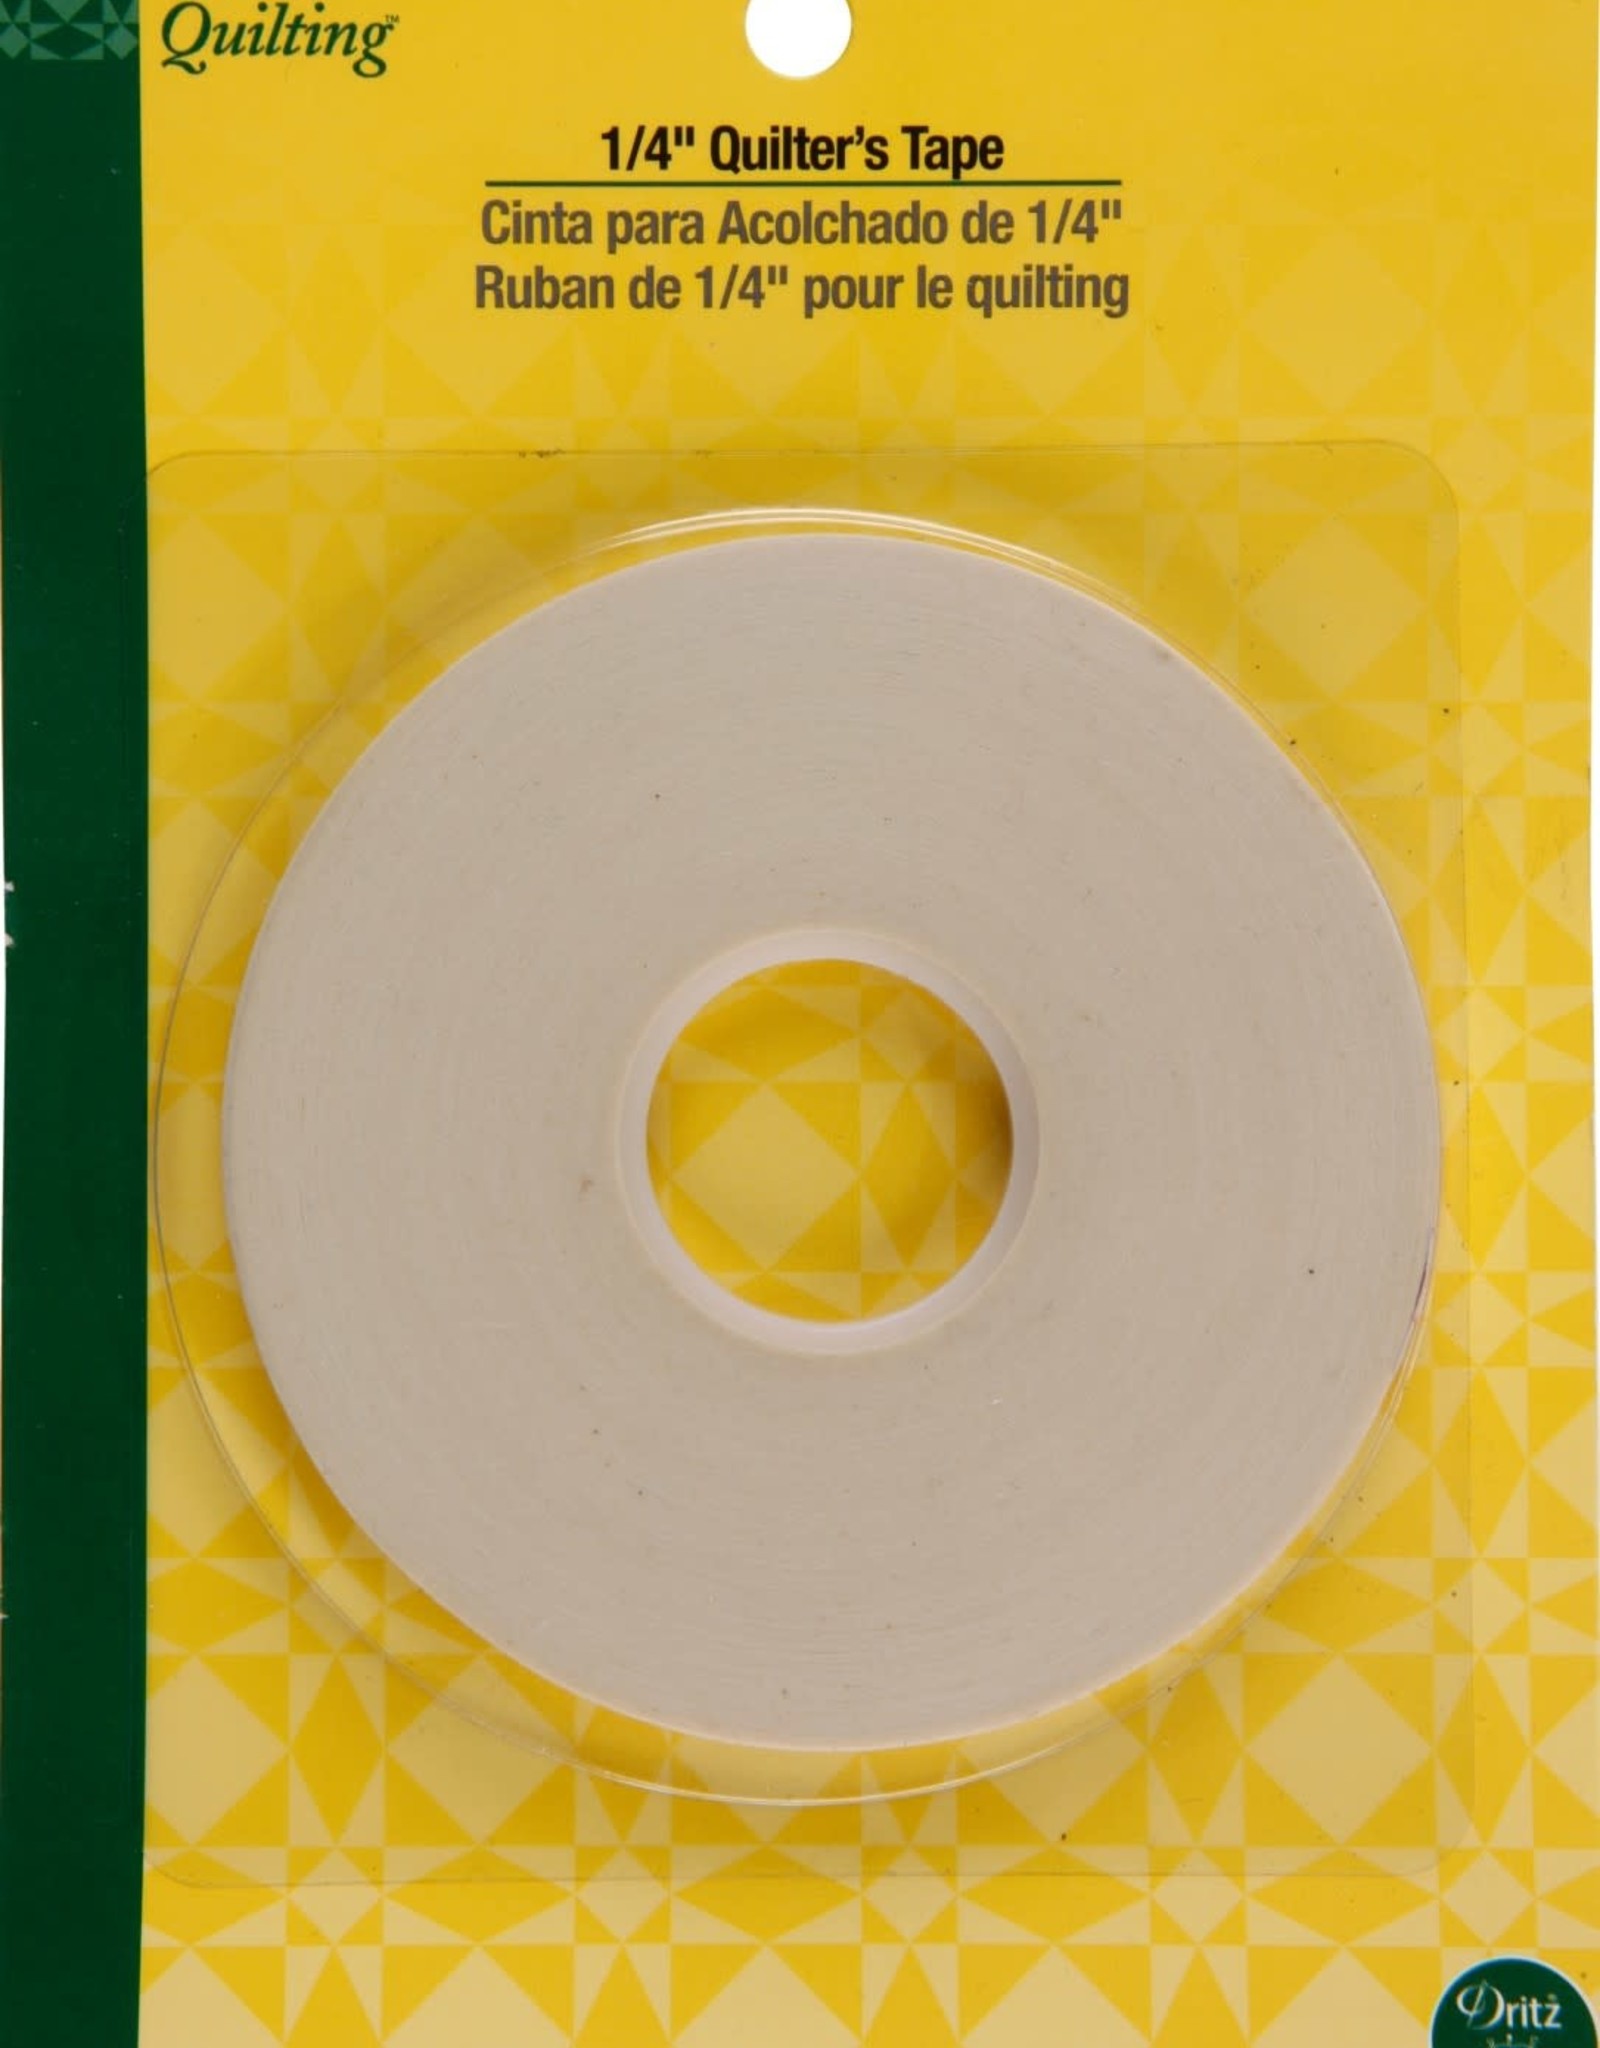 Dritz Quilters Tape 1/4 inch